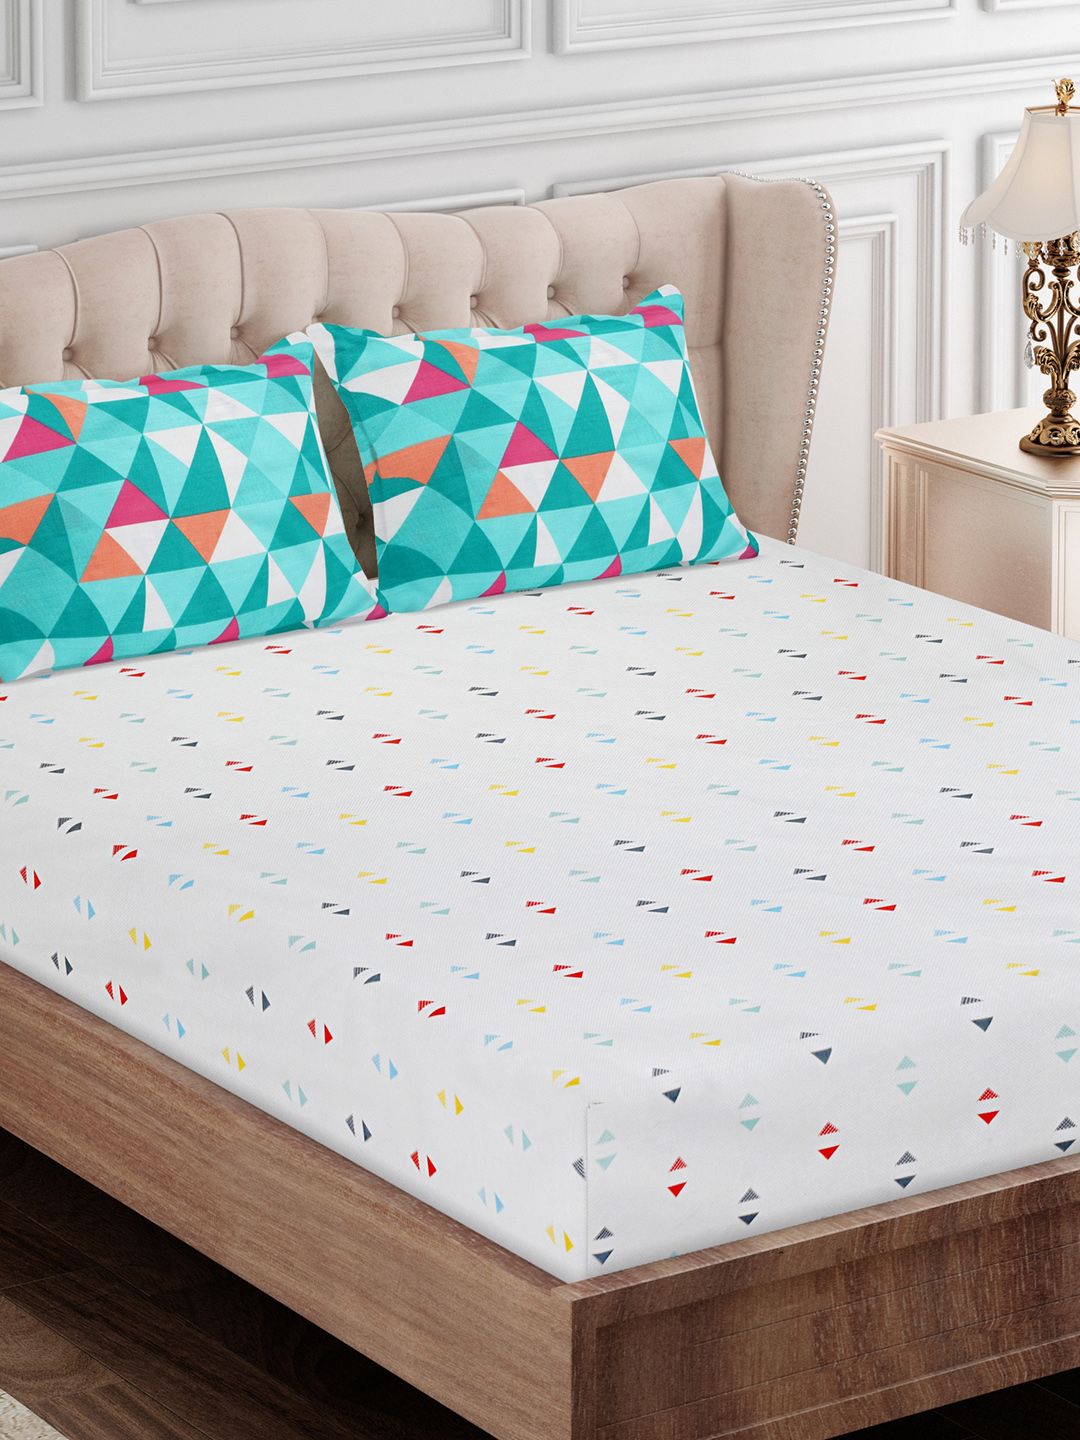 SEJ by Nisha Gupta Grey & Blue Geometric 180 TC King Bedsheet with 2 Pillow Covers Price in India